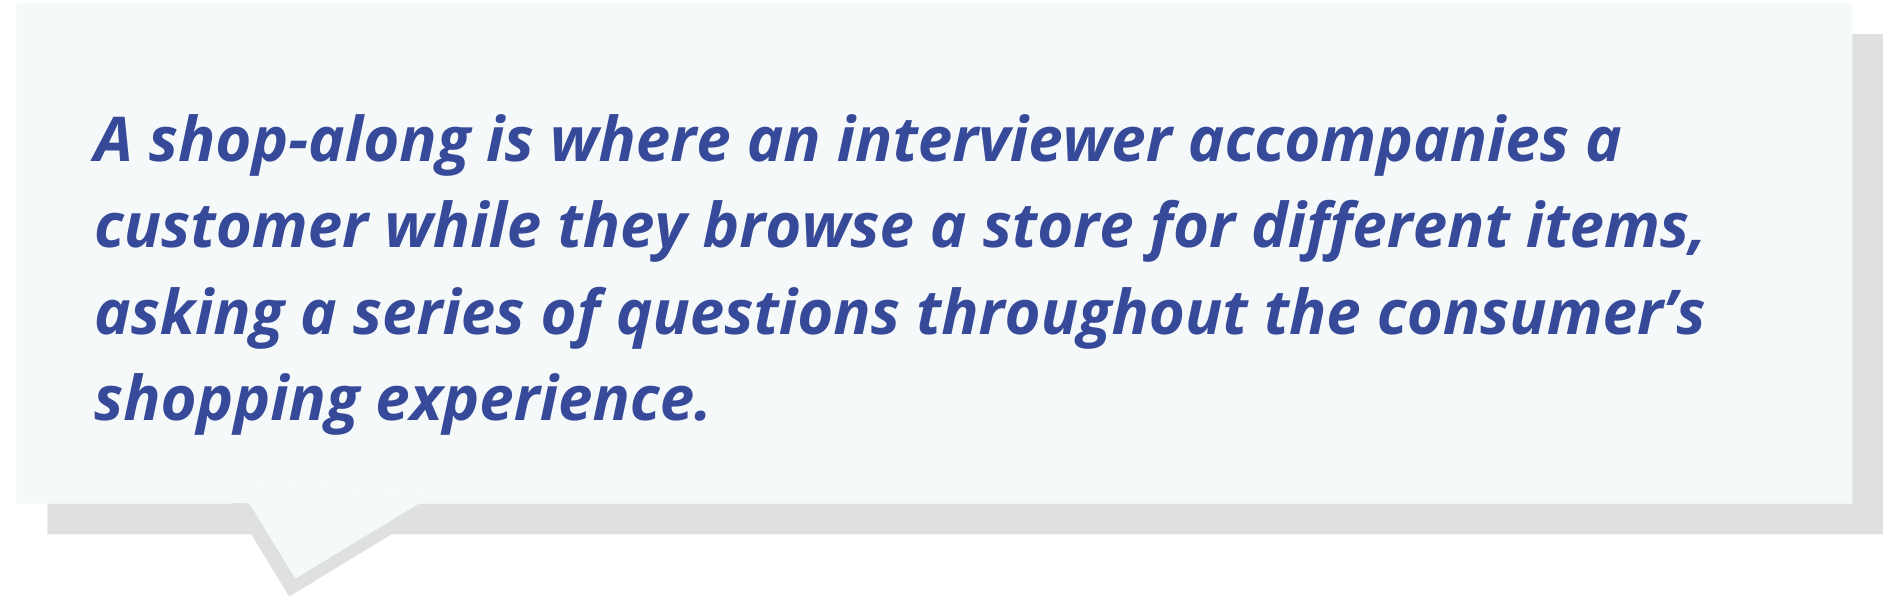 A shop-along is where an interviewer accompanies a customer while they browse a store for different items, asking a series of questions throughout the consumer’s shopping experience.